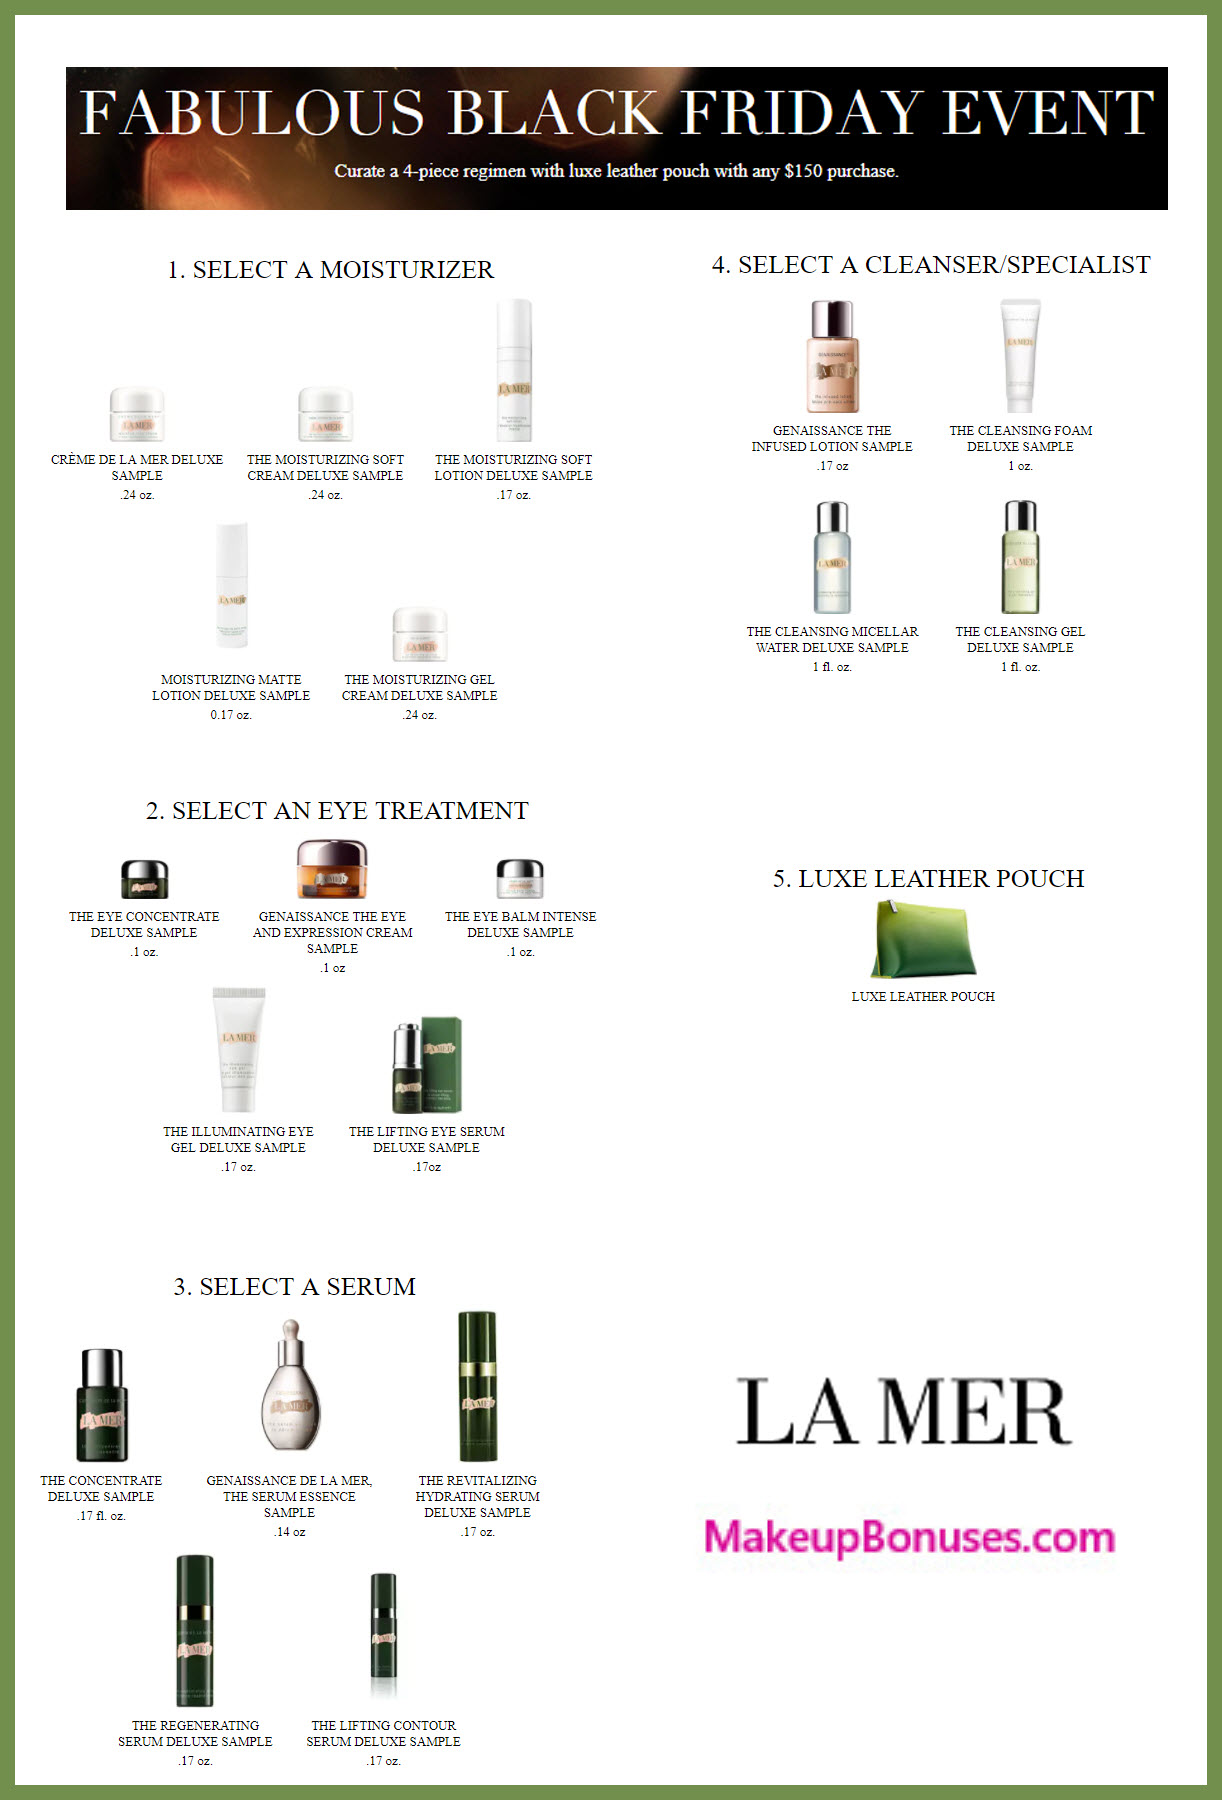 Receive your choice of 5-pc gift with your $150 La Mer purchase